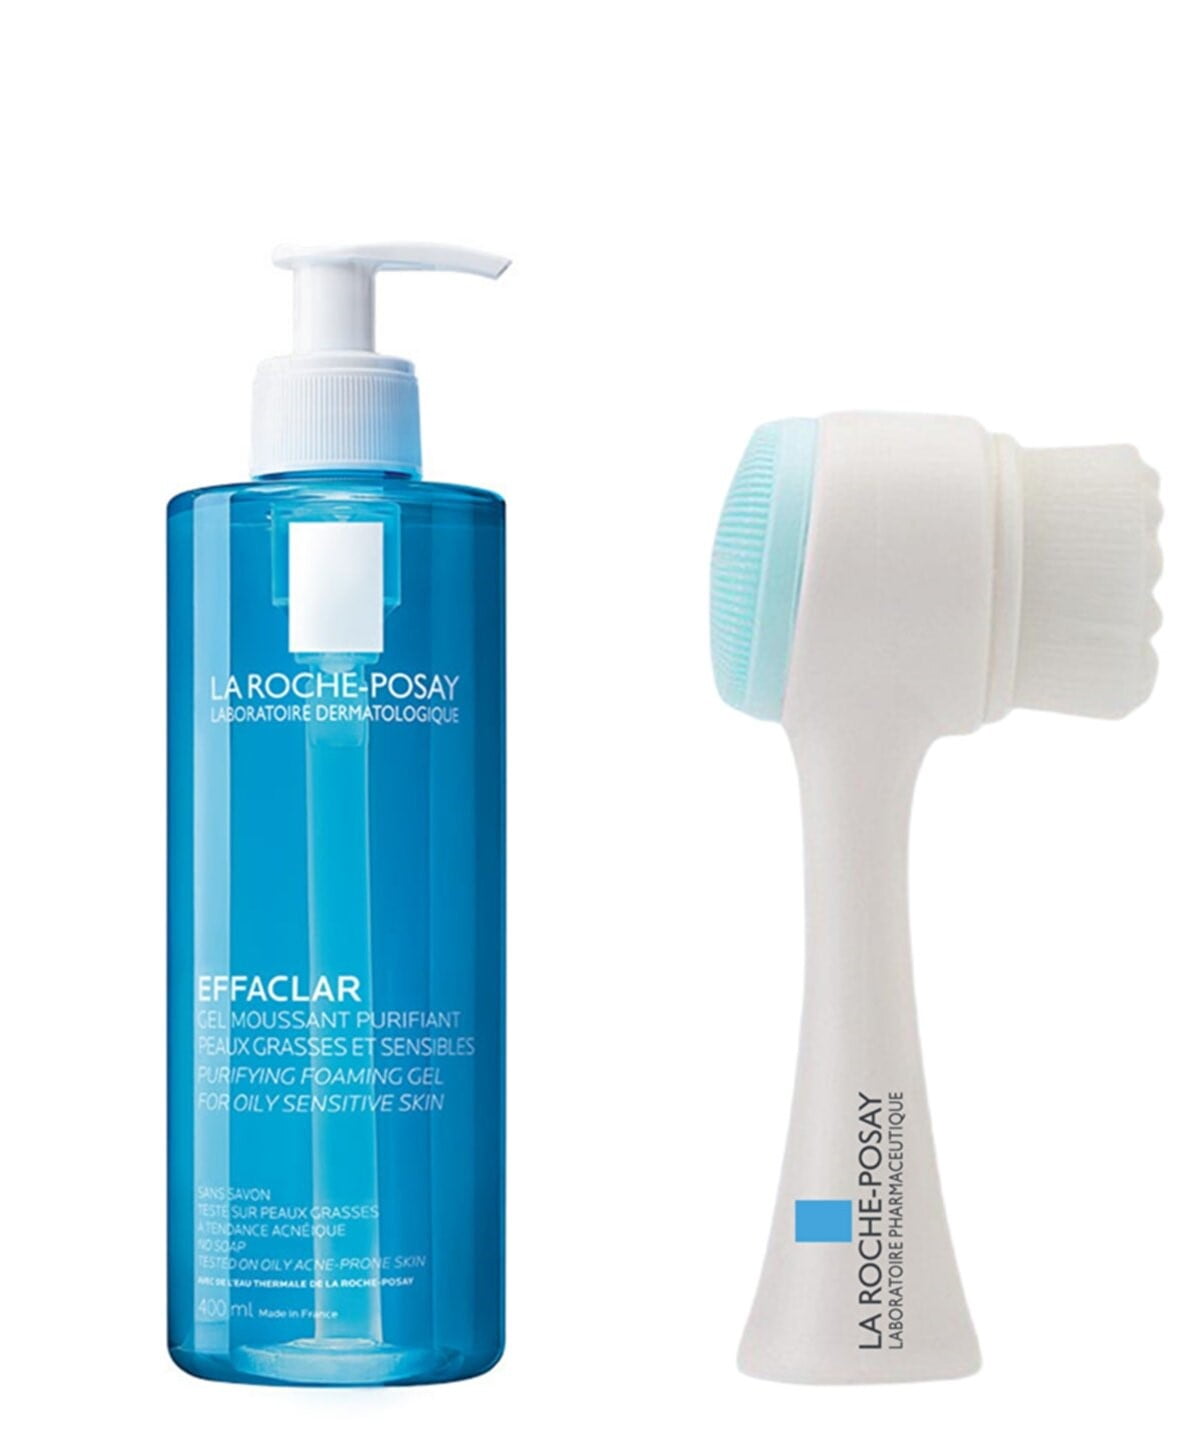 Roche Posay Effaclar Cleansing Gel 400 ml And Facial Cleansing Brush - Walmart.com